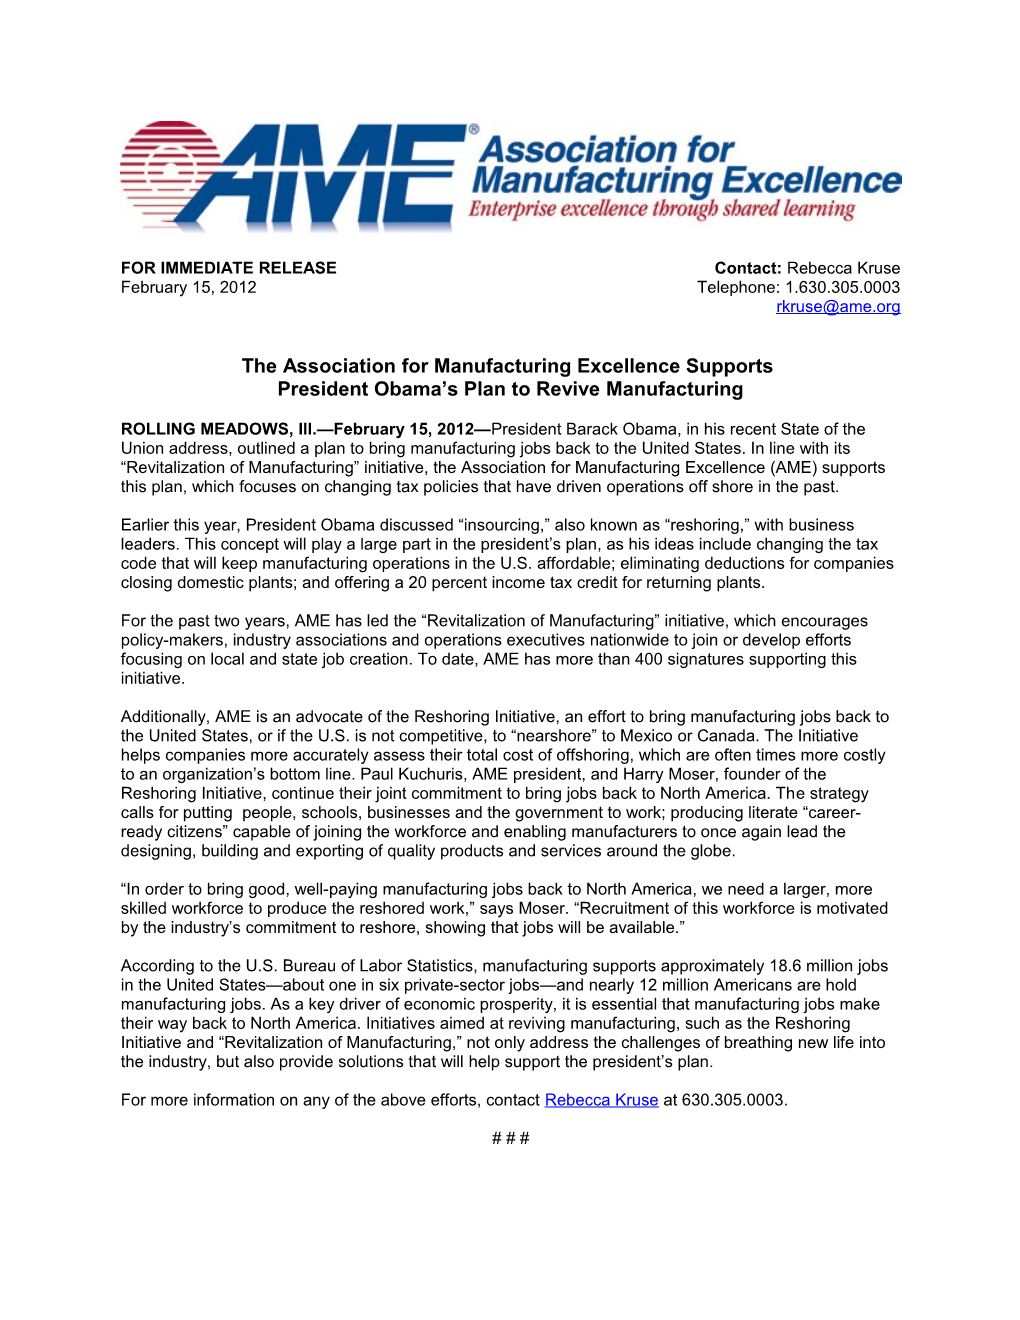 The Association for Manufacturing Excellence Supports